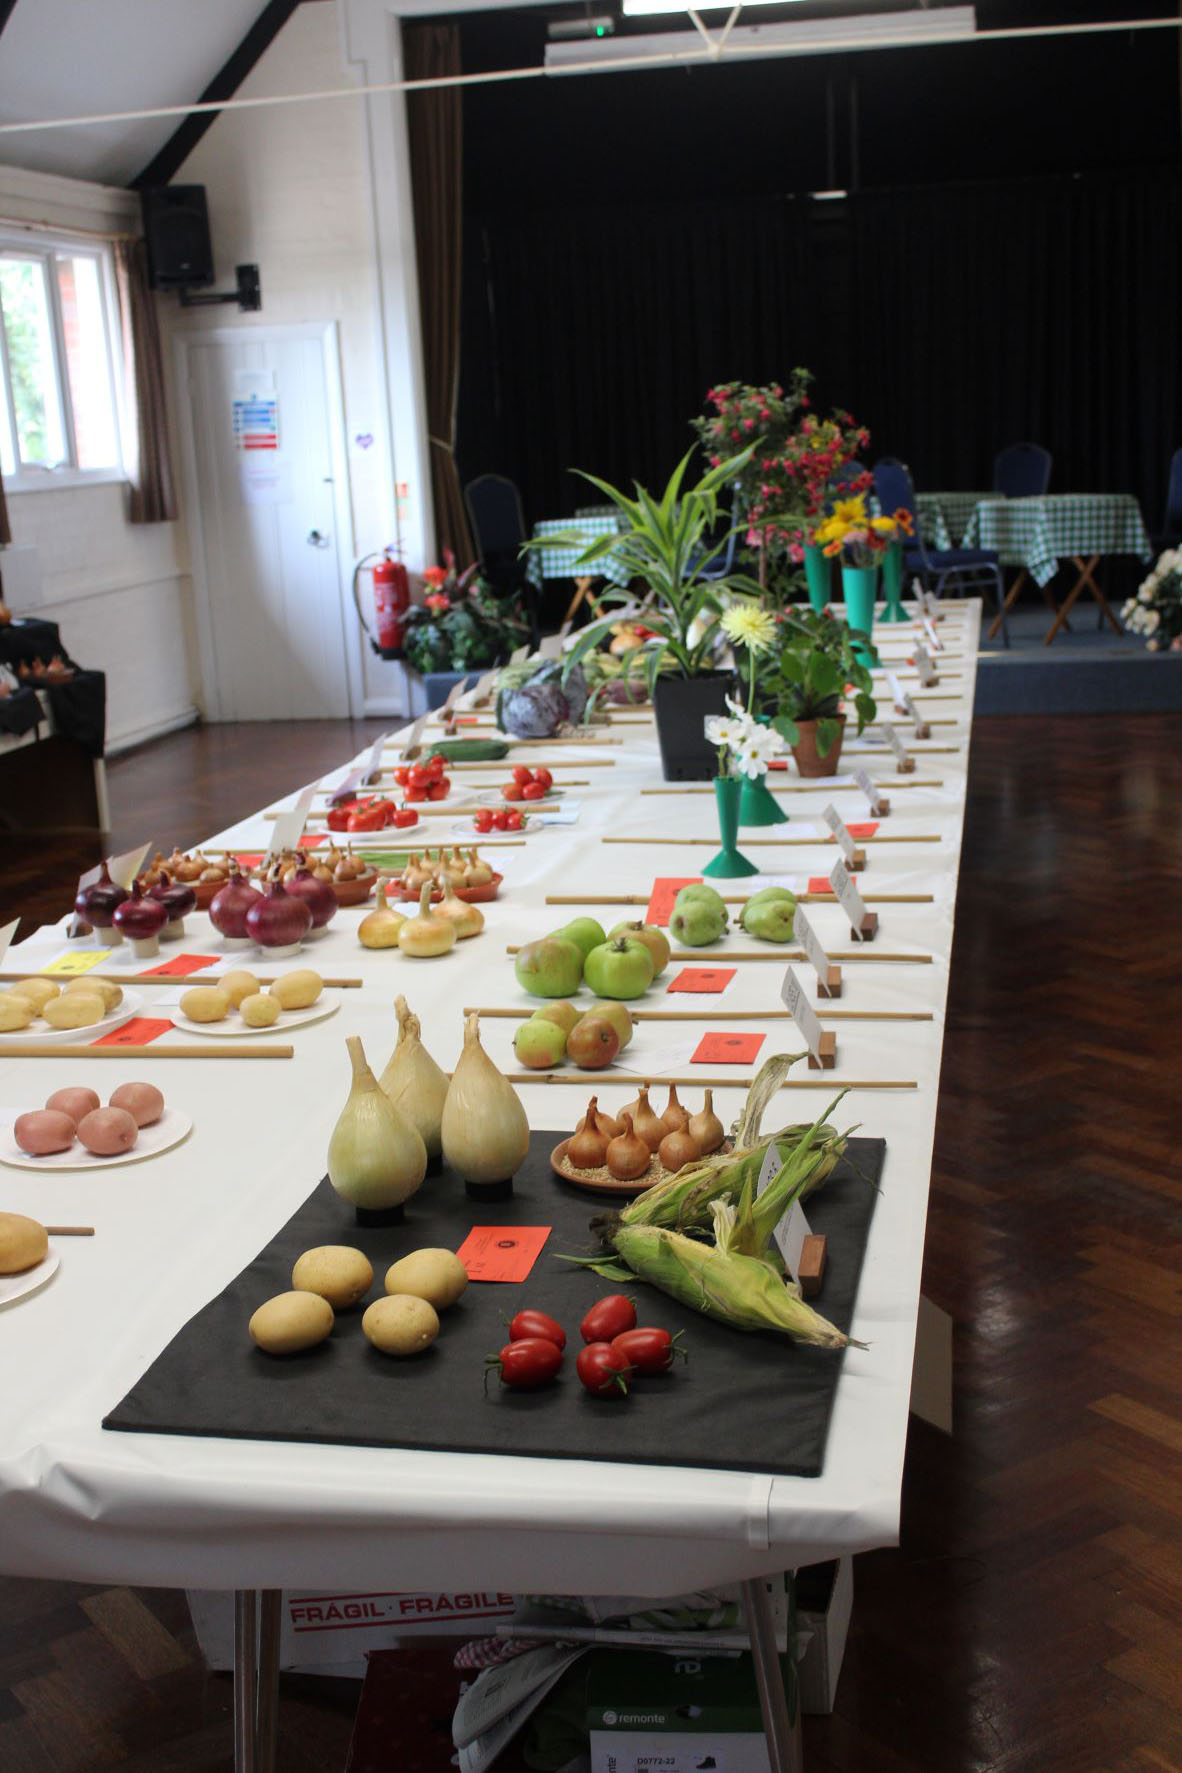 Autumn Show 2022 - Fruit and Vegetables